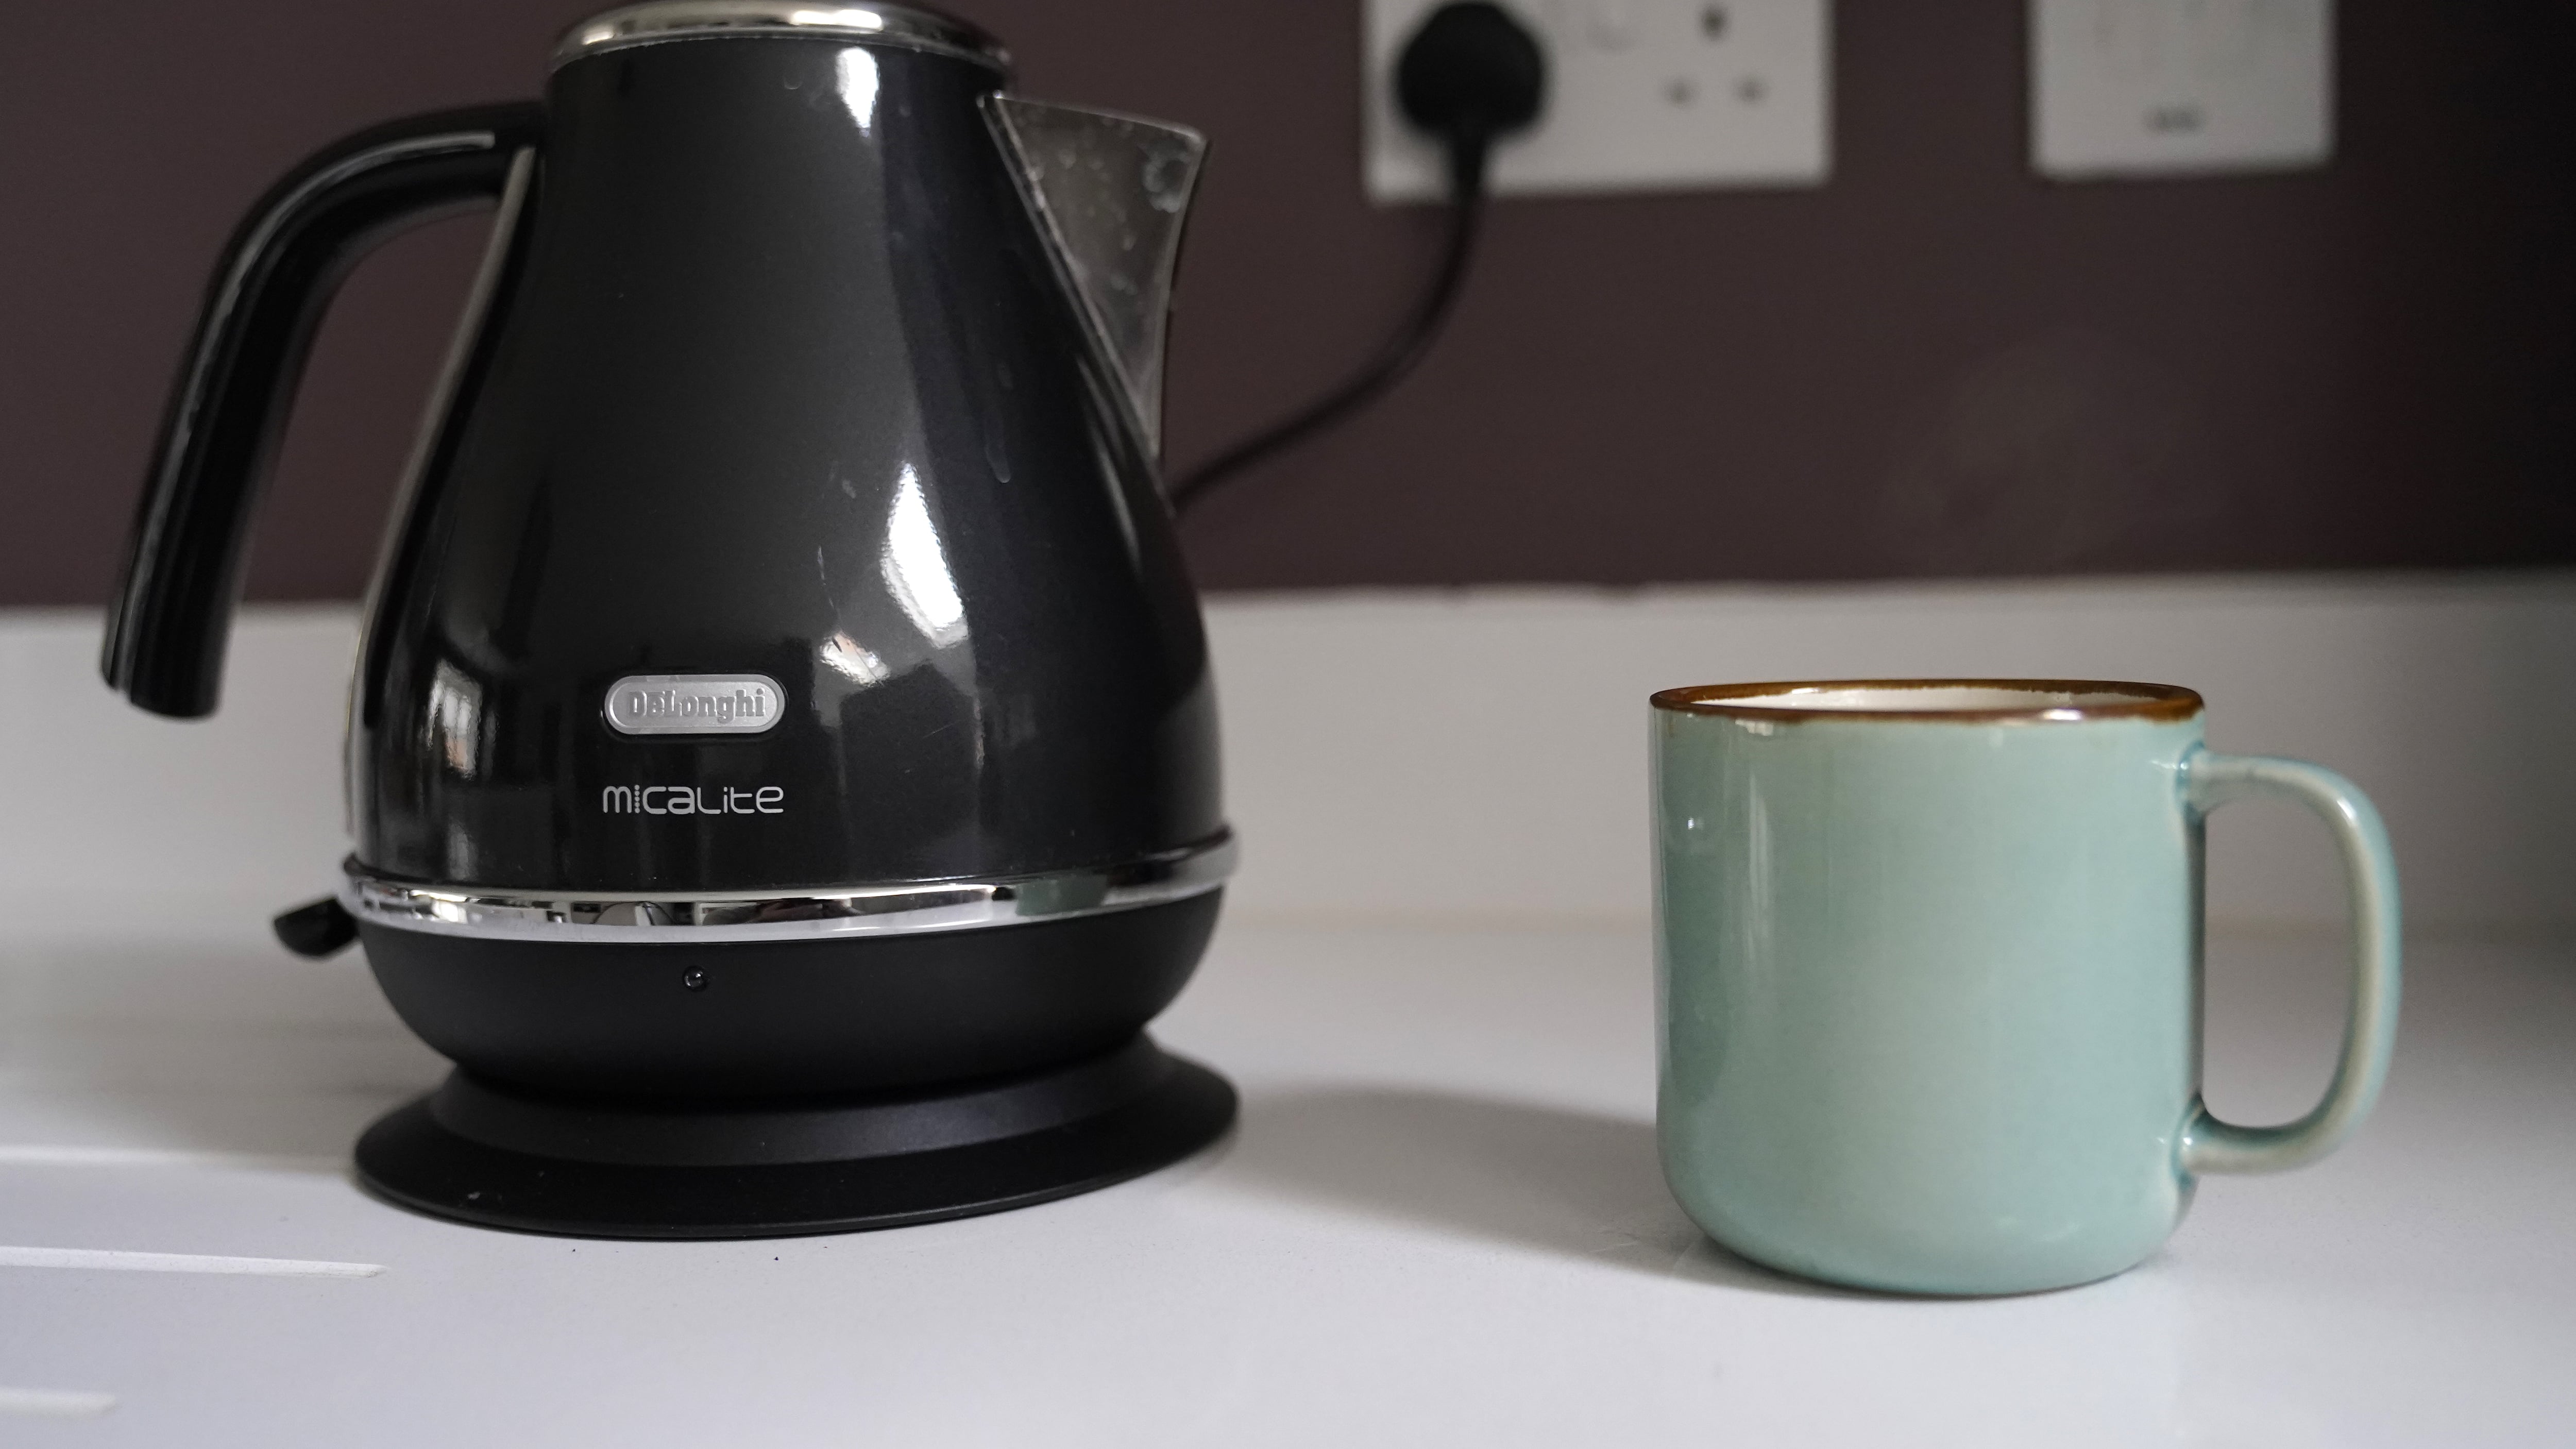 The device can monitor appliances such as kettles